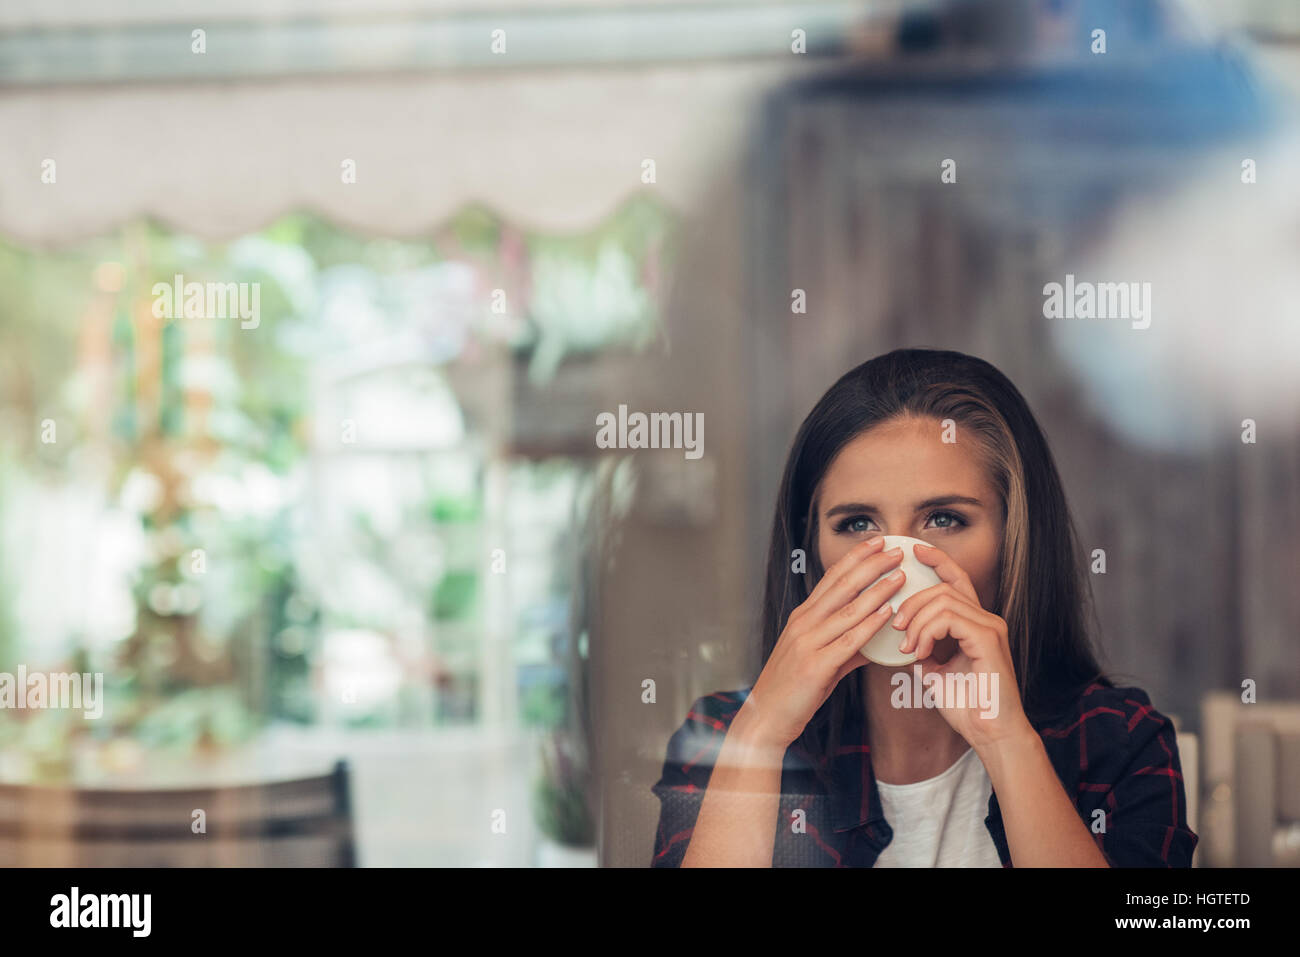 Young woman deep in thought drinking a coffee Stock Photo